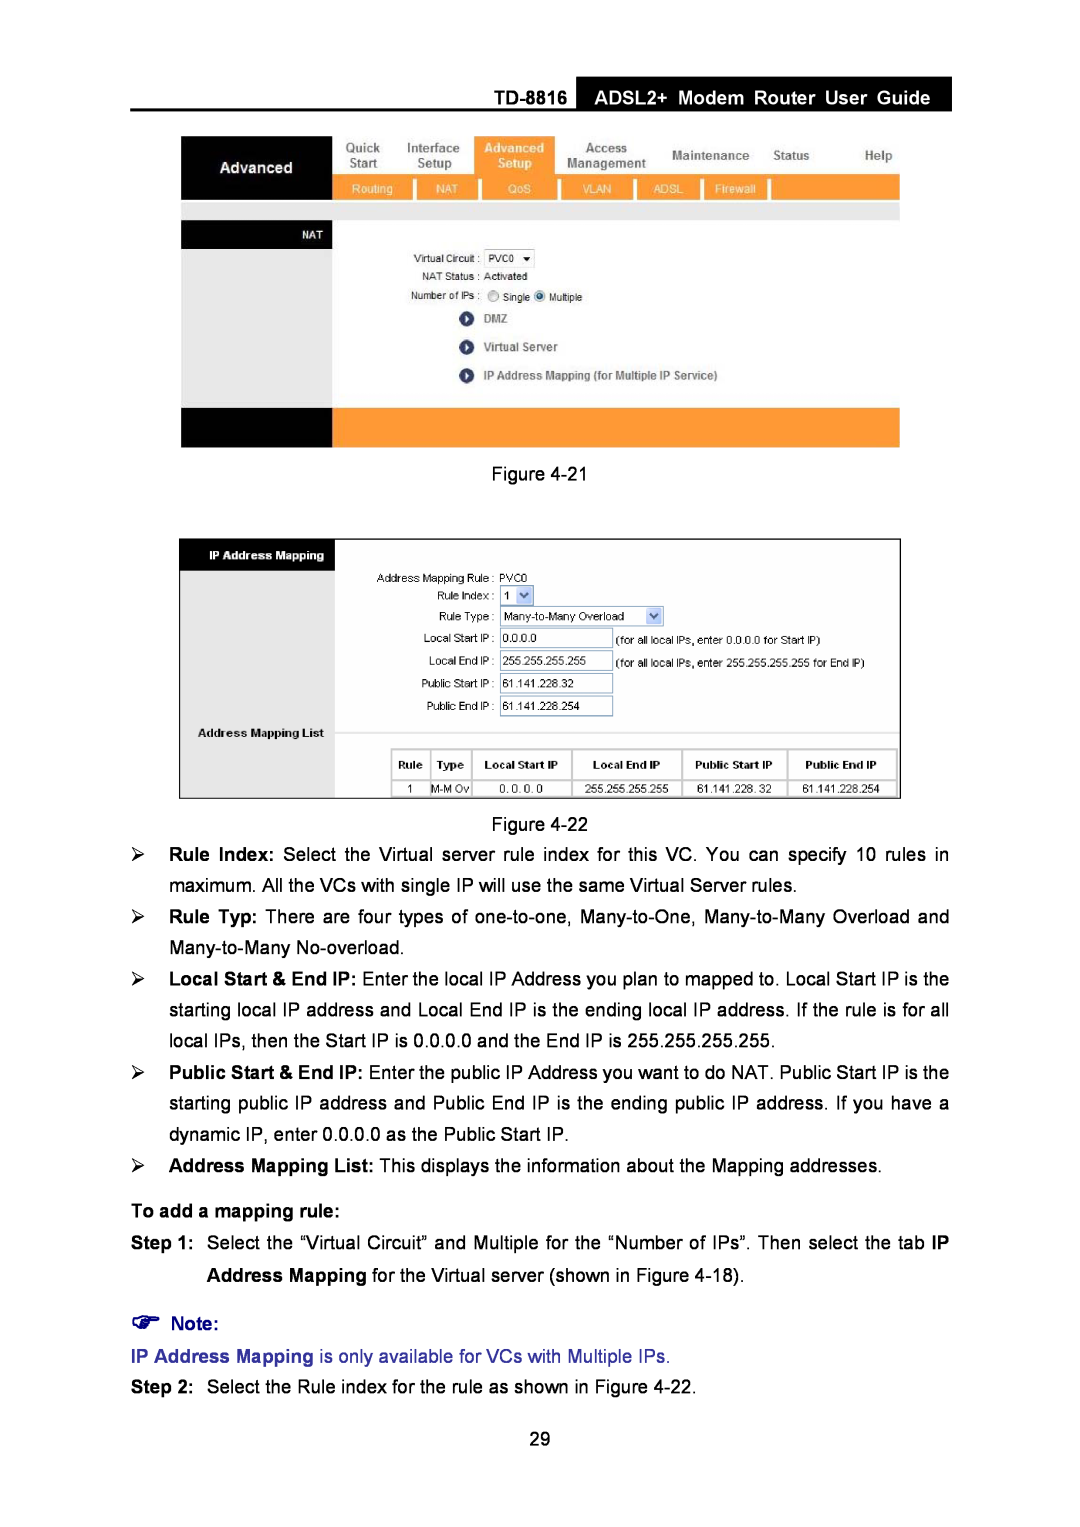 TP-Link TD-8816 manual ADSL2+ Modem Router User Guide, To add a mapping rule 